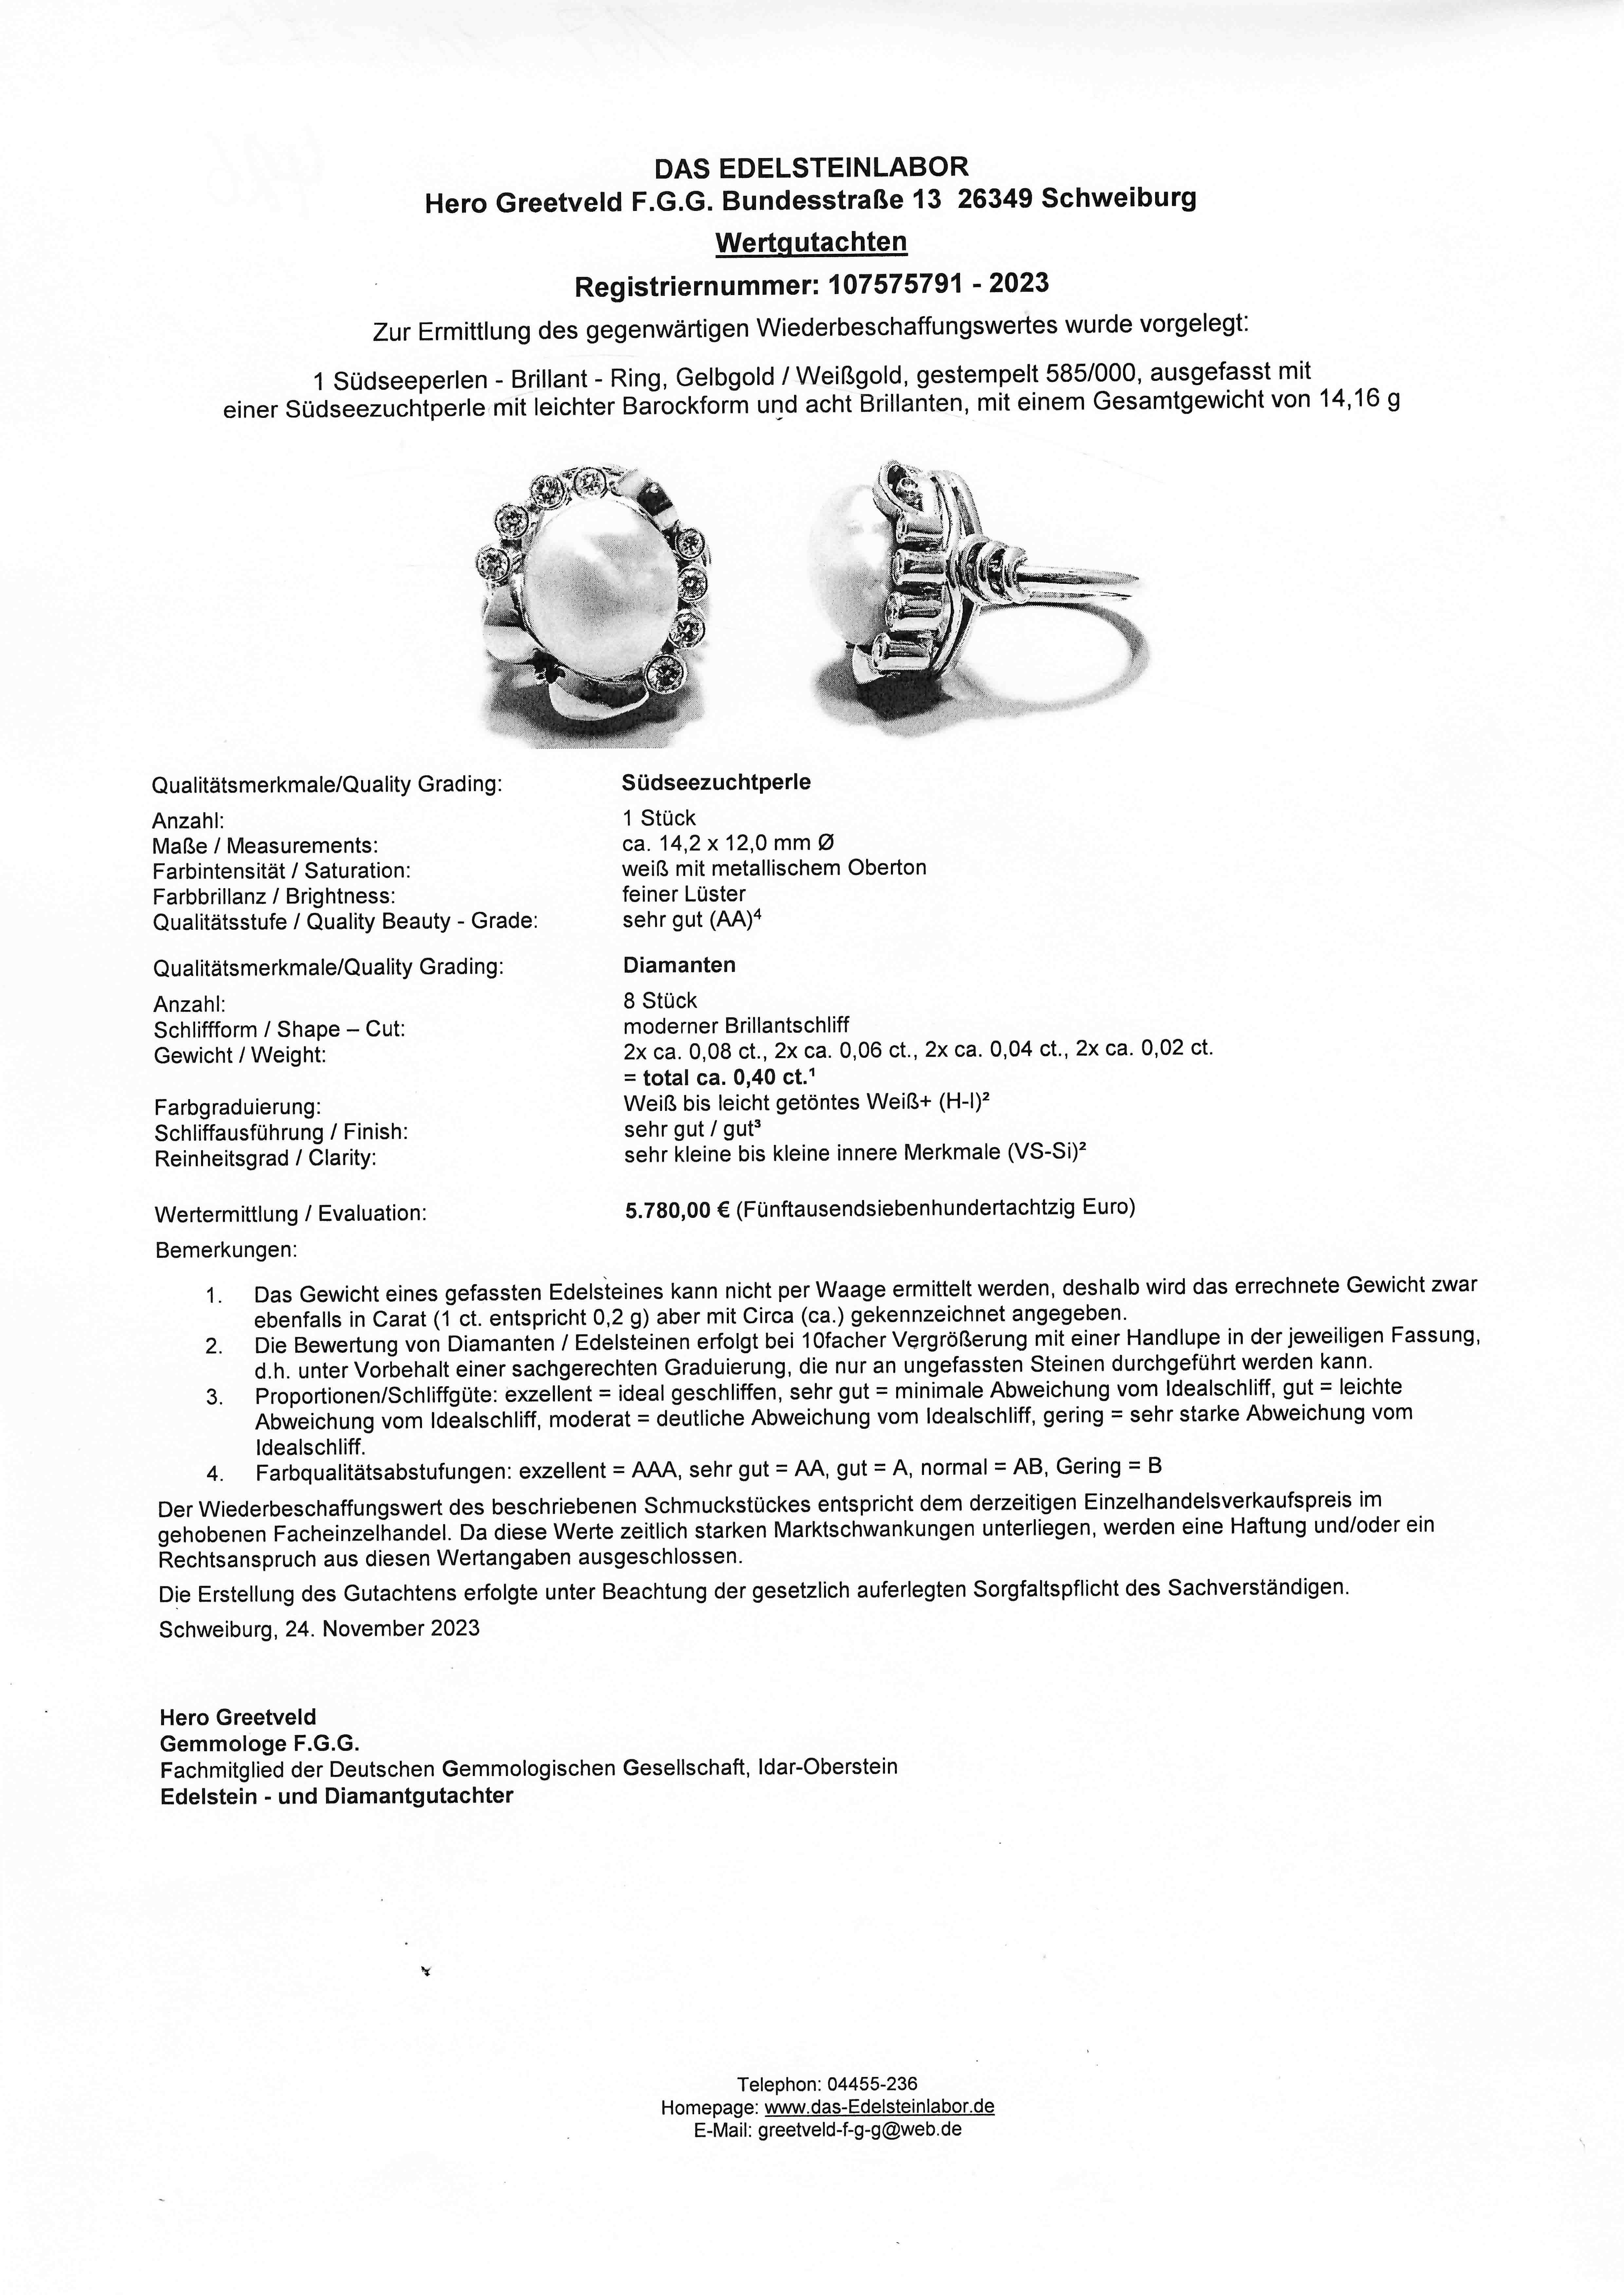 South Sea pearl diamond ring GG/WG 585/000 with a South Sea cultured pearl 14.2 x 12.0 mm in light - Image 2 of 2